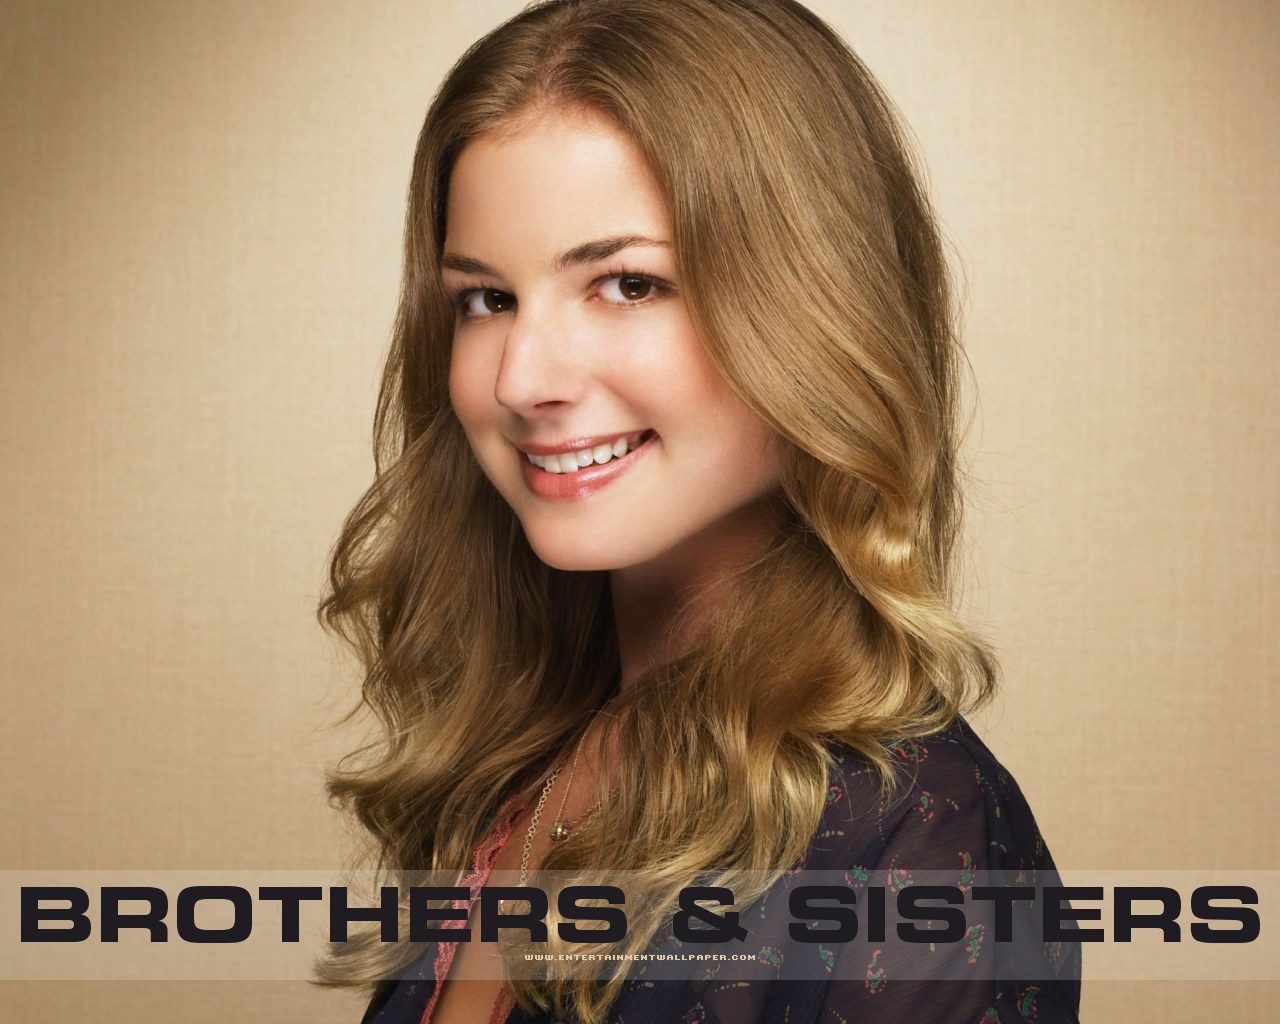 Brothers & Sisters 兄弟姐妹 #23 - 1280x1024